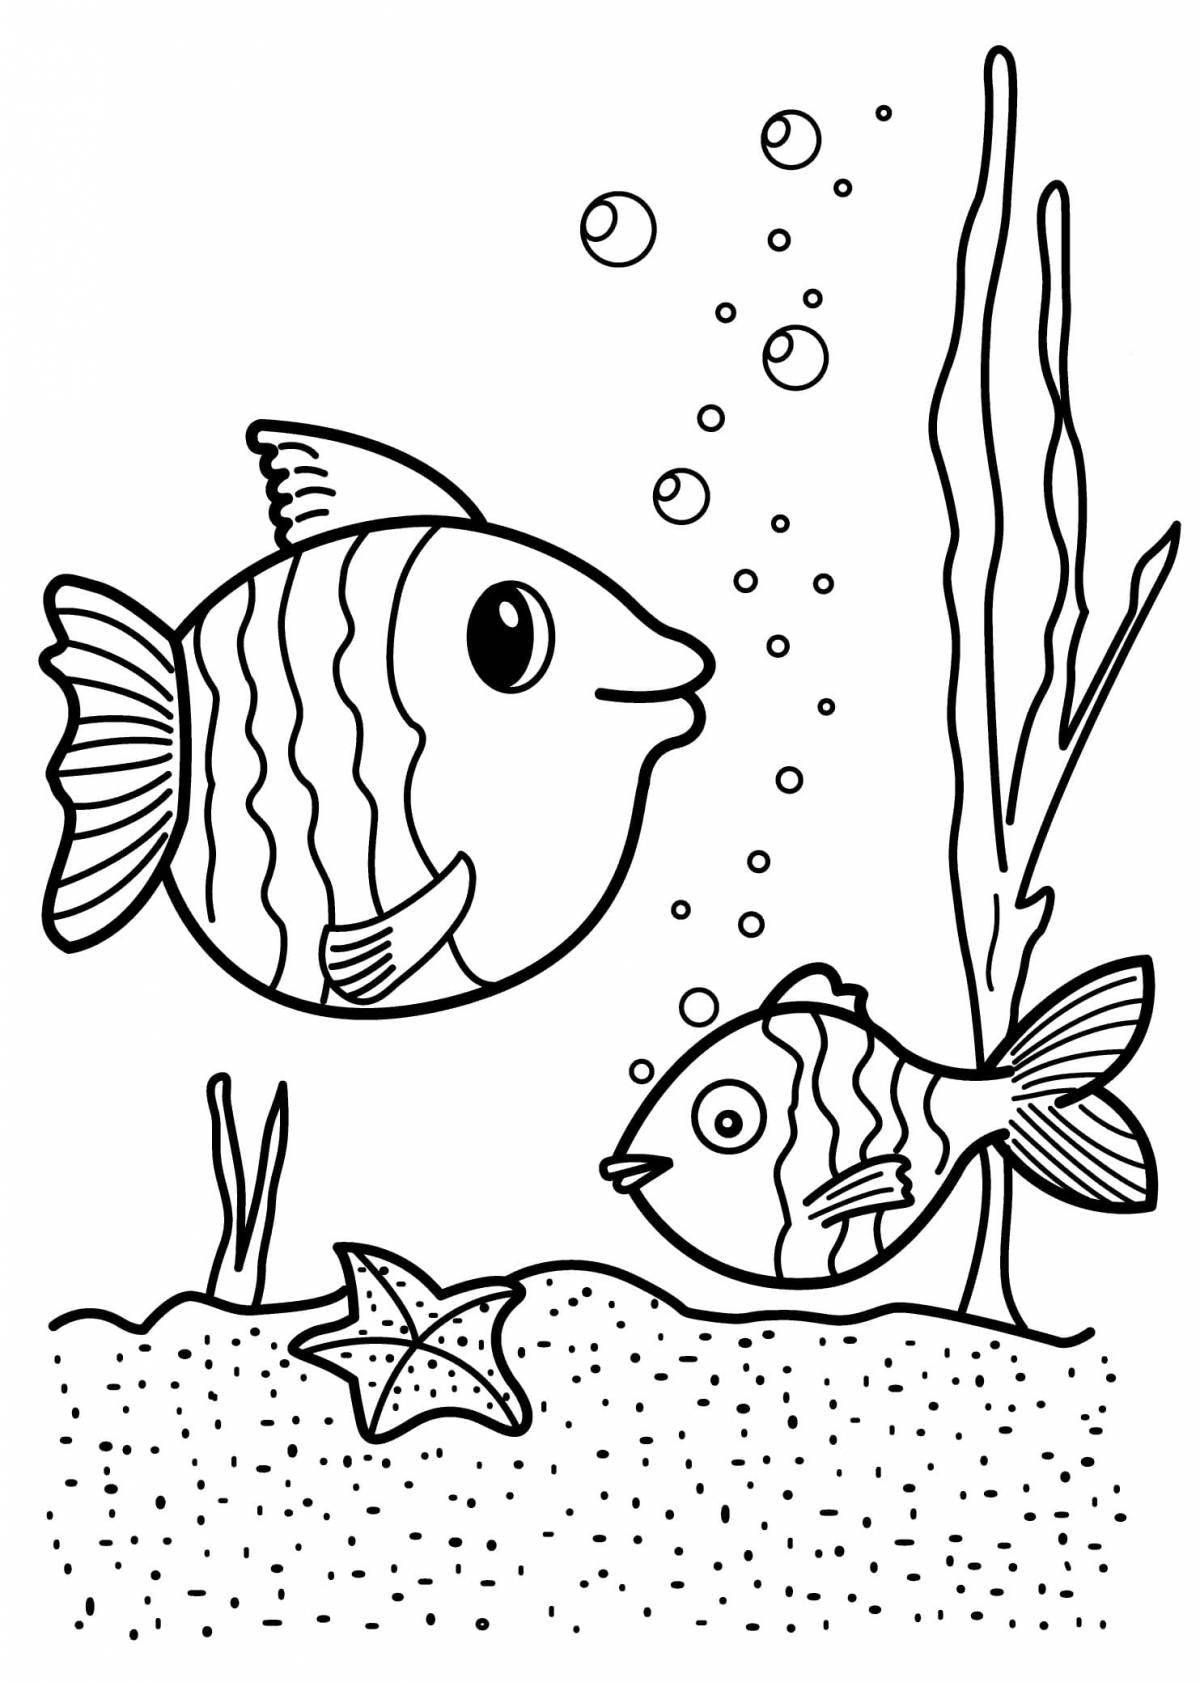 Bright fish coloring book for children 6-7 years old